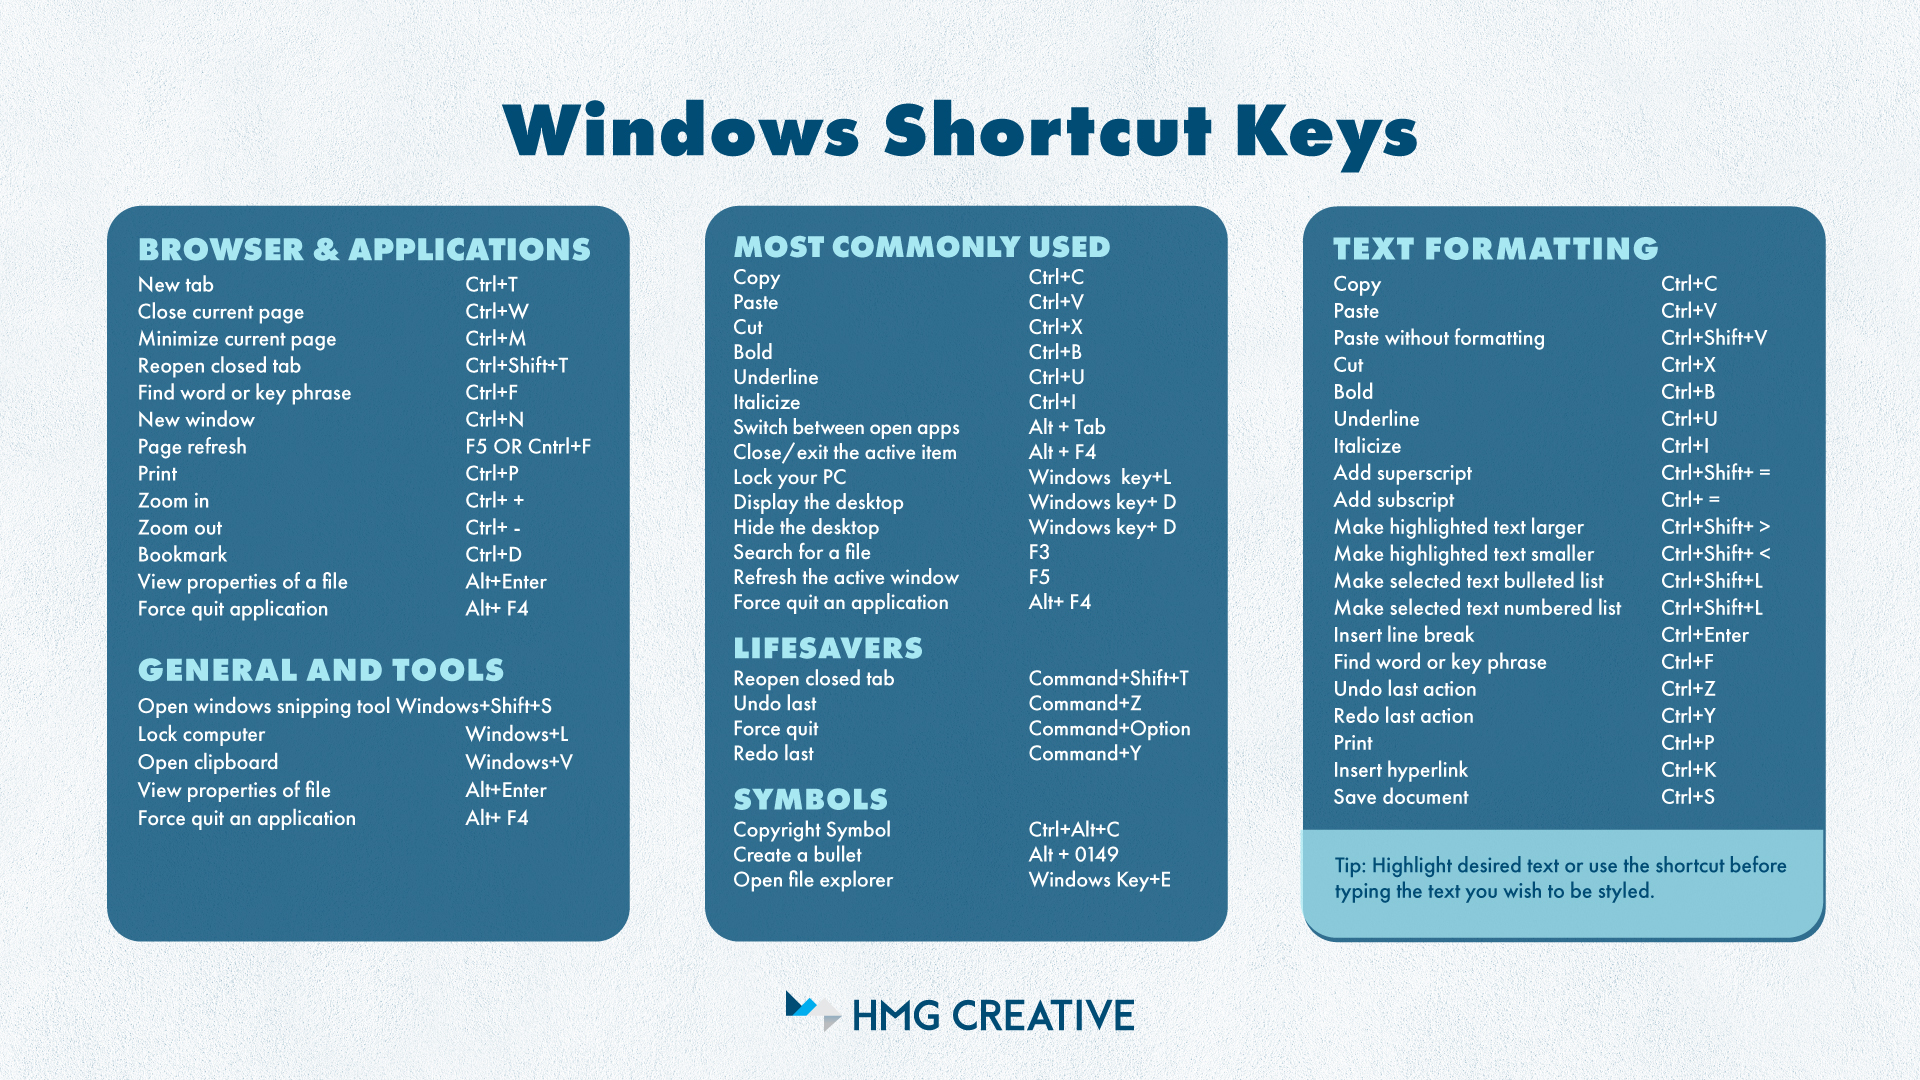 Shortcuts but in image form